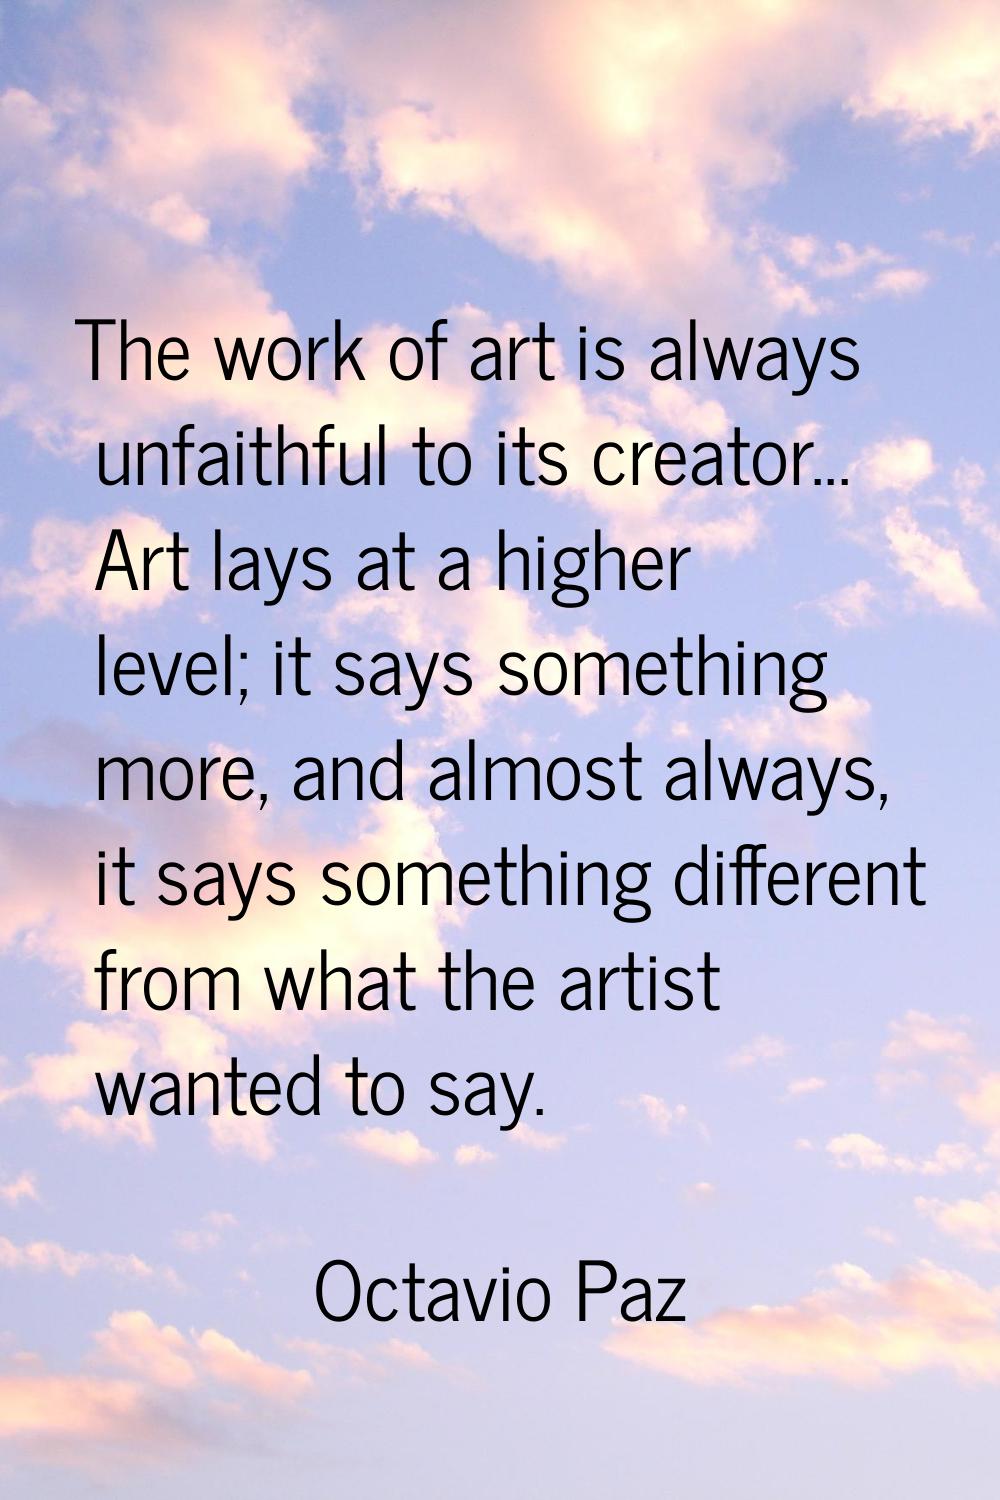 The work of art is always unfaithful to its creator... Art lays at a higher level; it says somethin